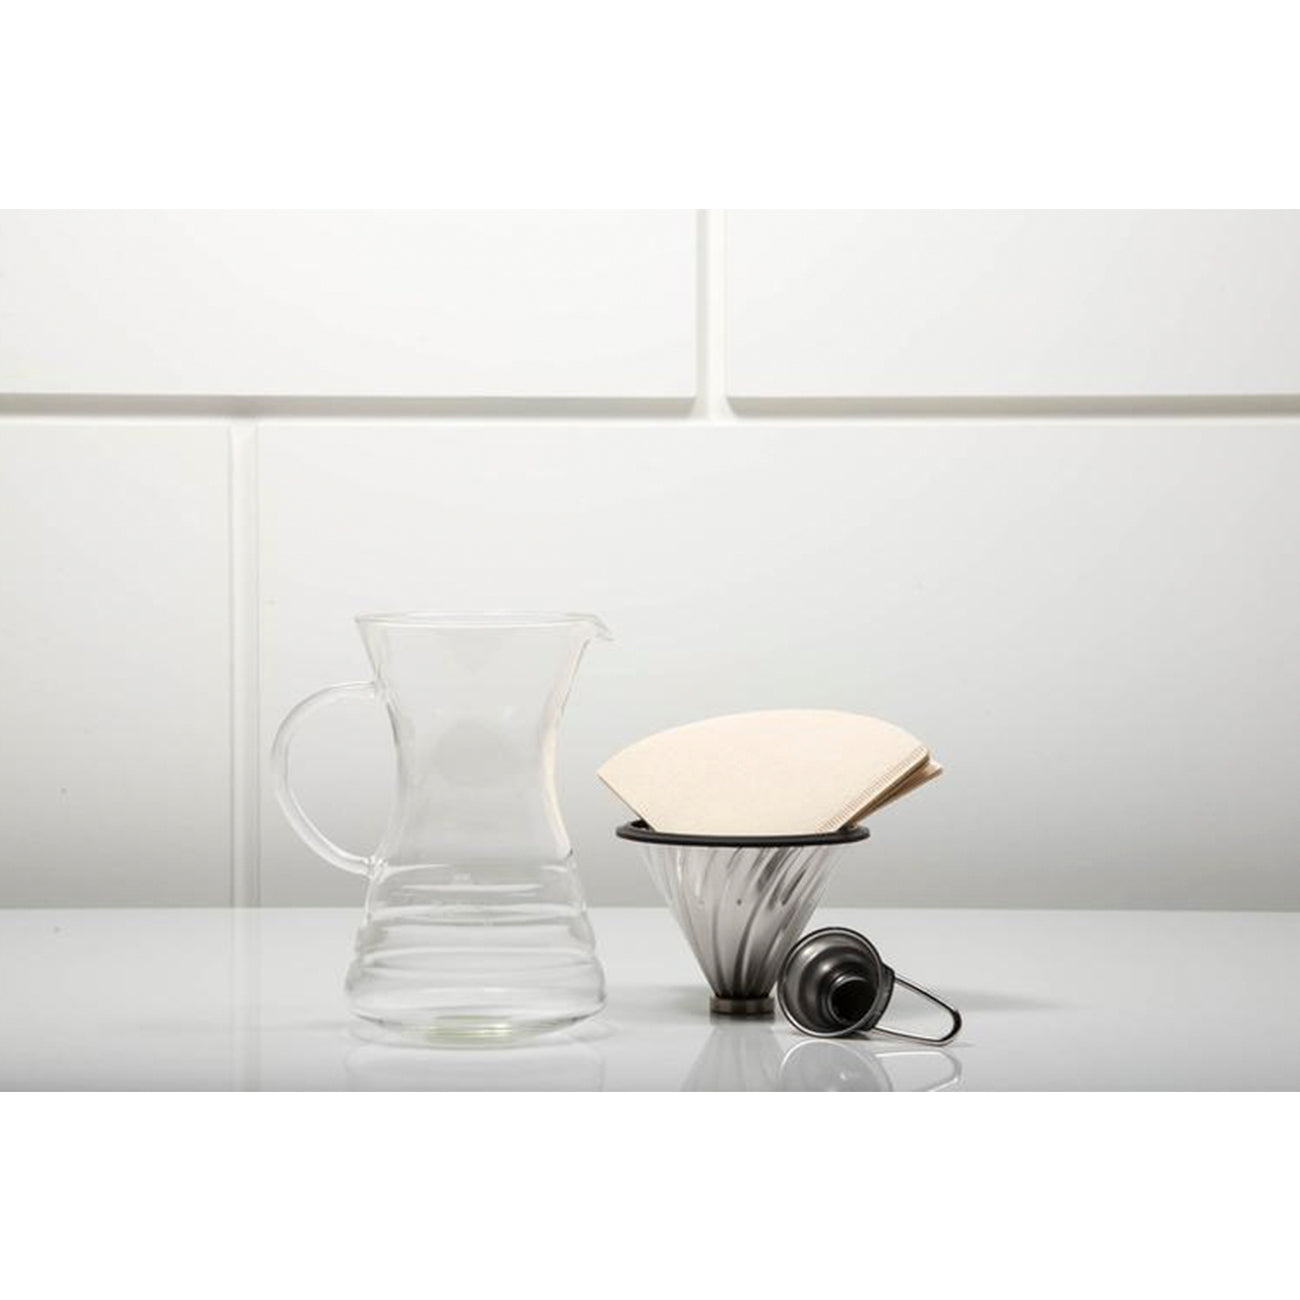 Hario V60, most popular pour over dripper, Size 02